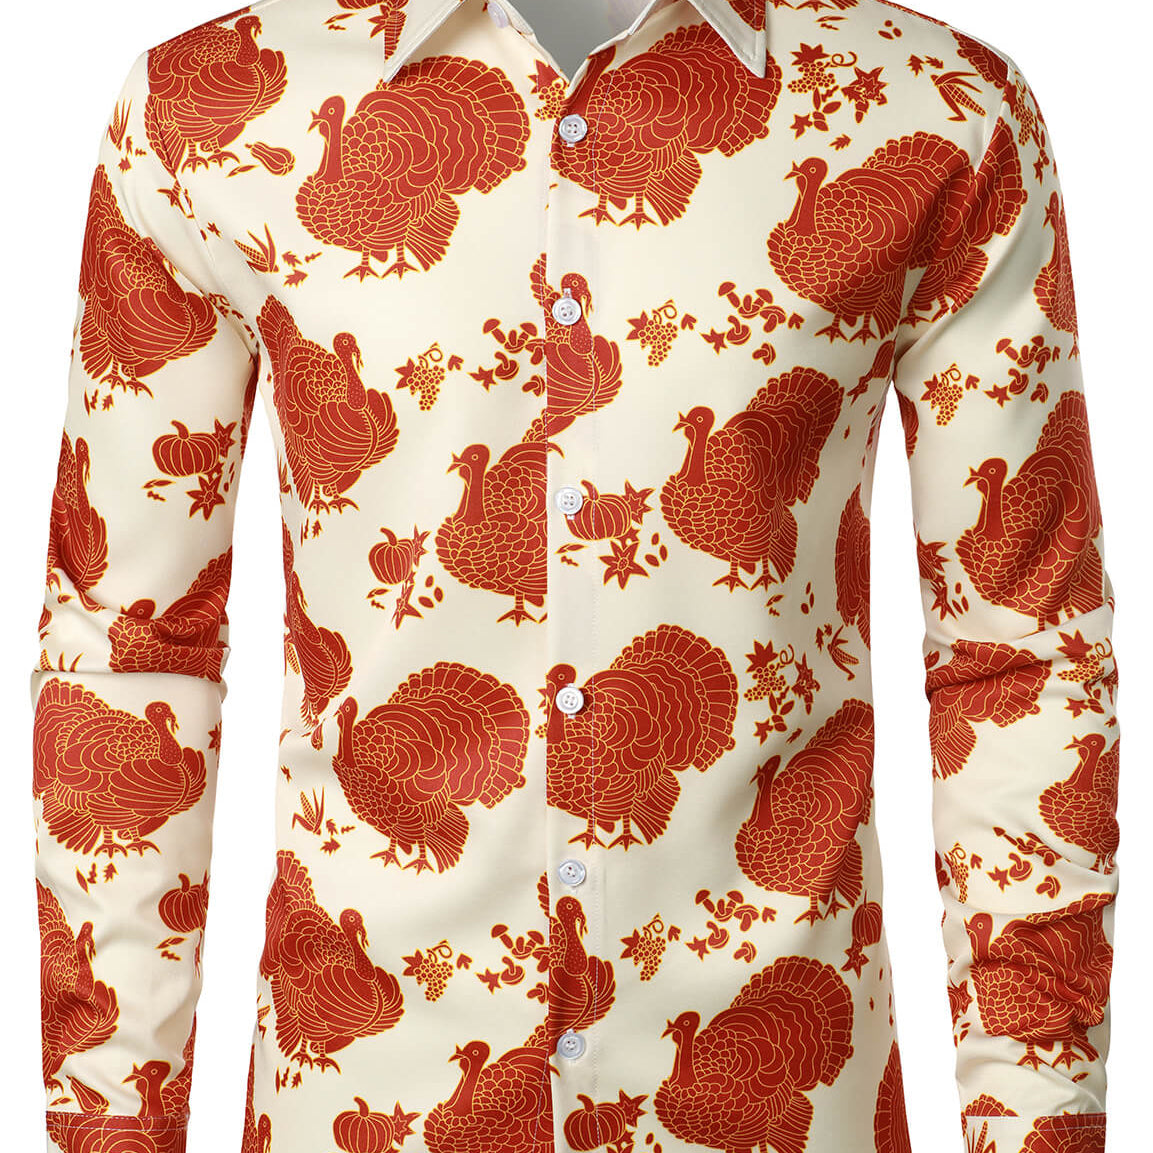 Men's Thanksgiving Turkey Day Fall Festival Gift Funny Holiday Button Long Sleeve Shirt